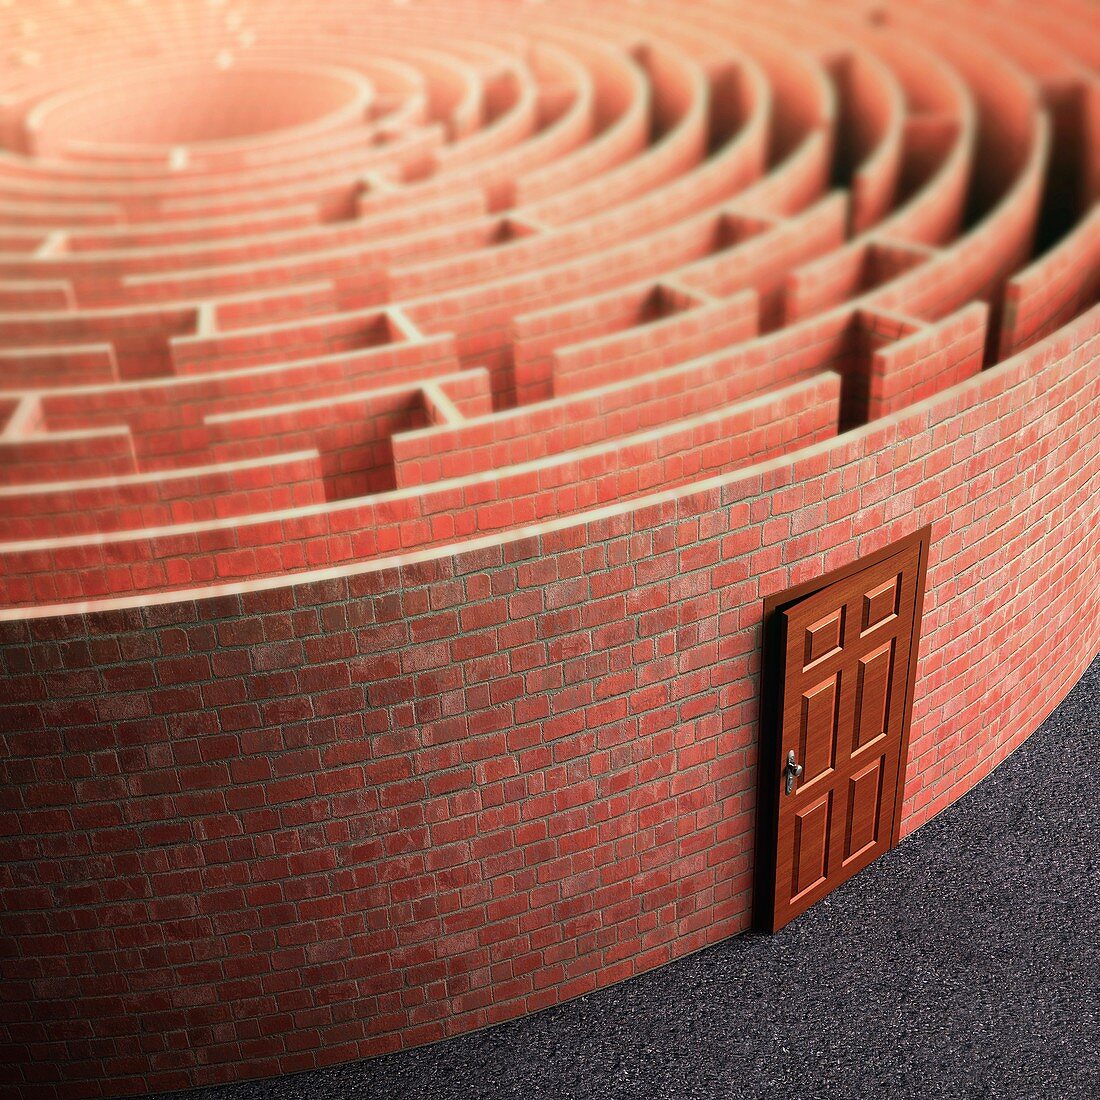 Labyrinth with a door,artwork